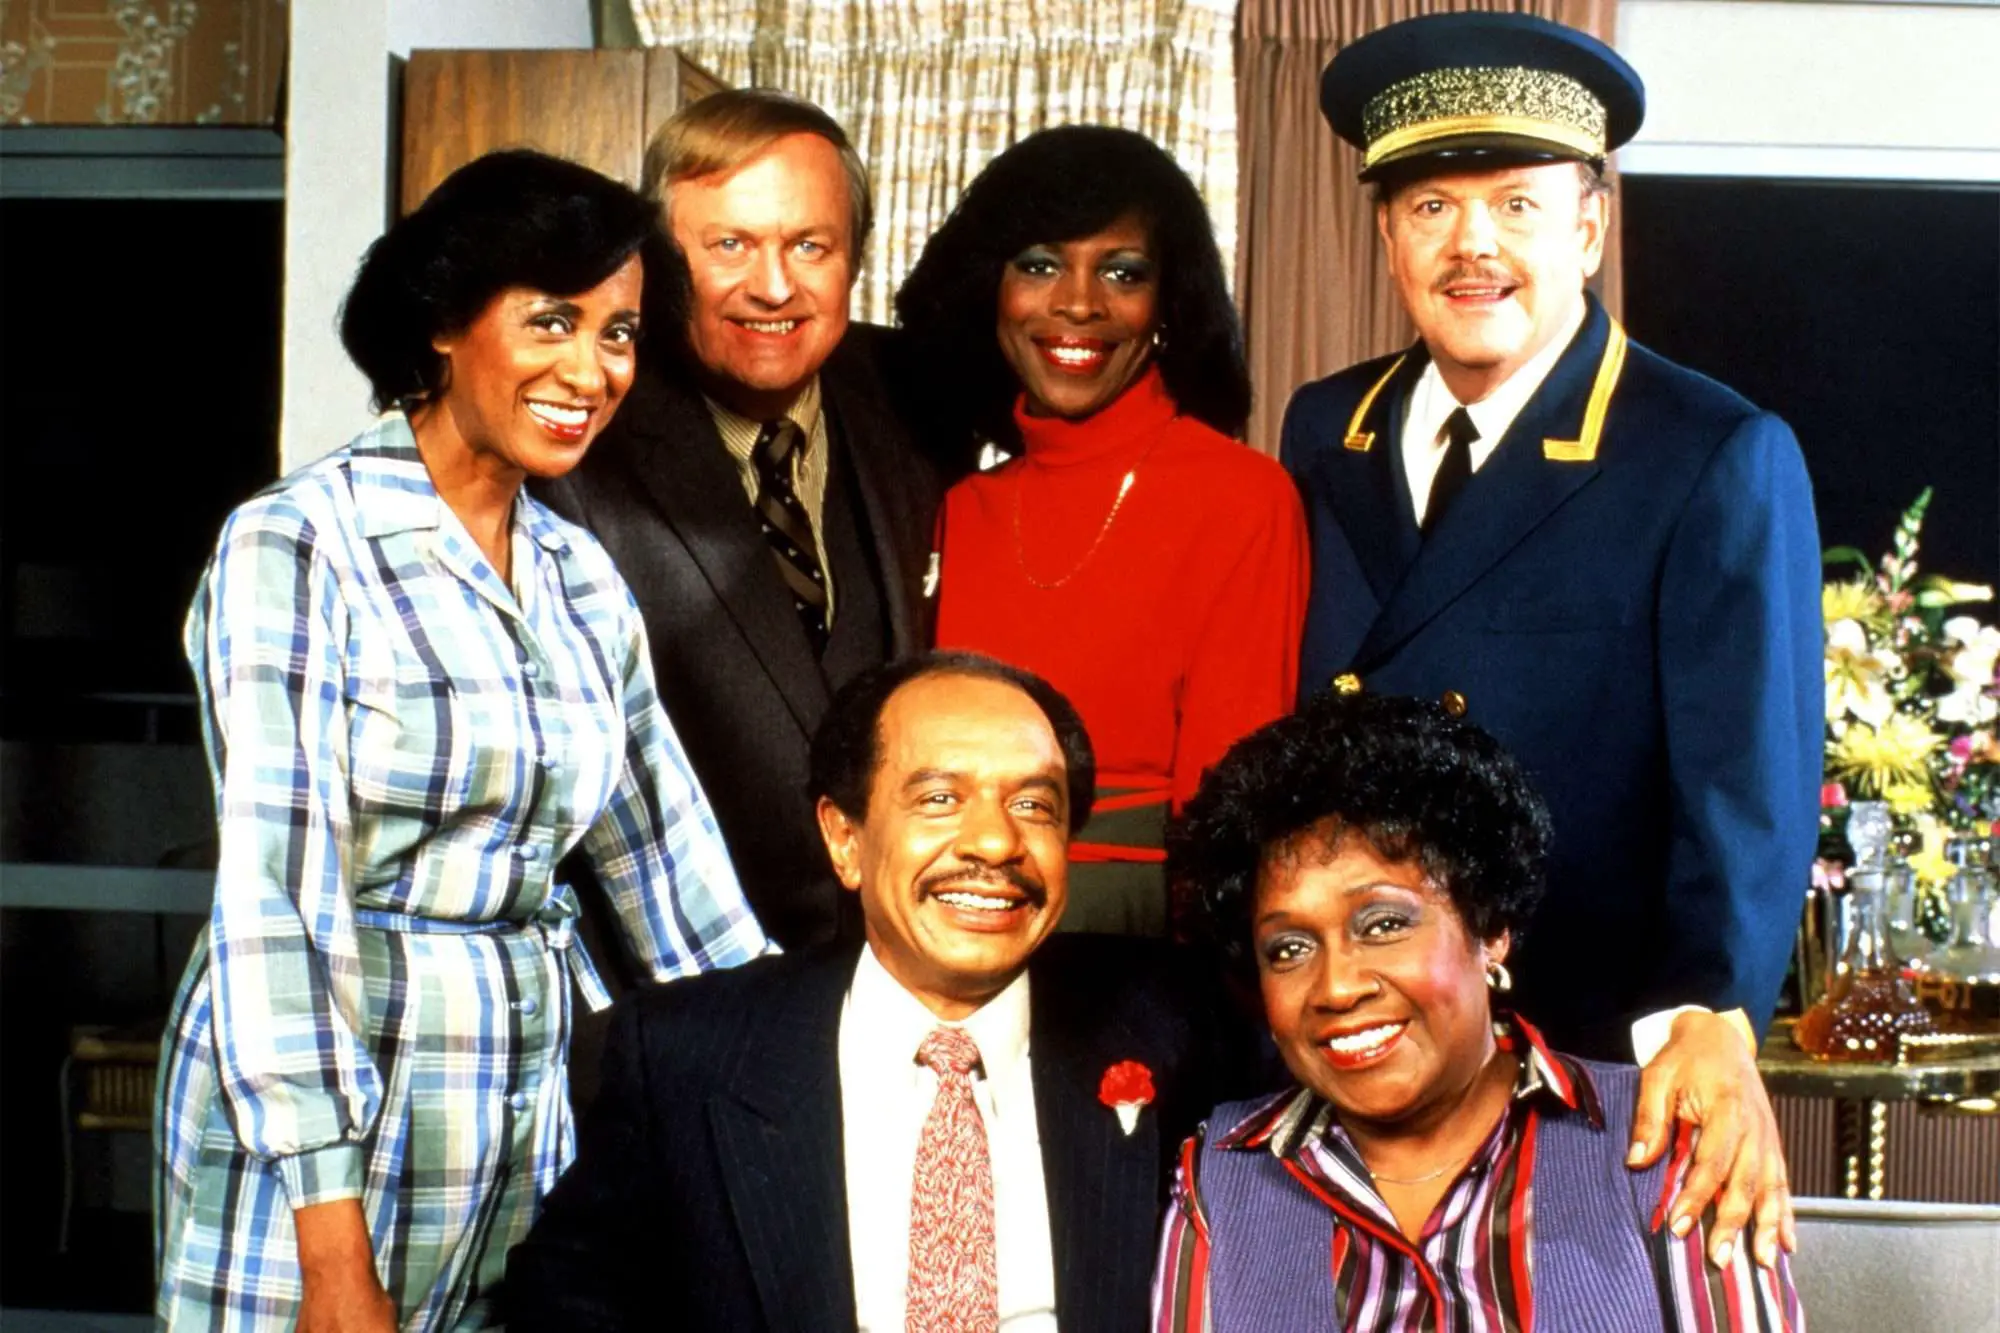 Black Sitcom the Jefferson cast with Isabel Sanford, Sherman Hemsley, Franklin Cover, Roxie Roker, Marla Gibbs and Mike Evans 